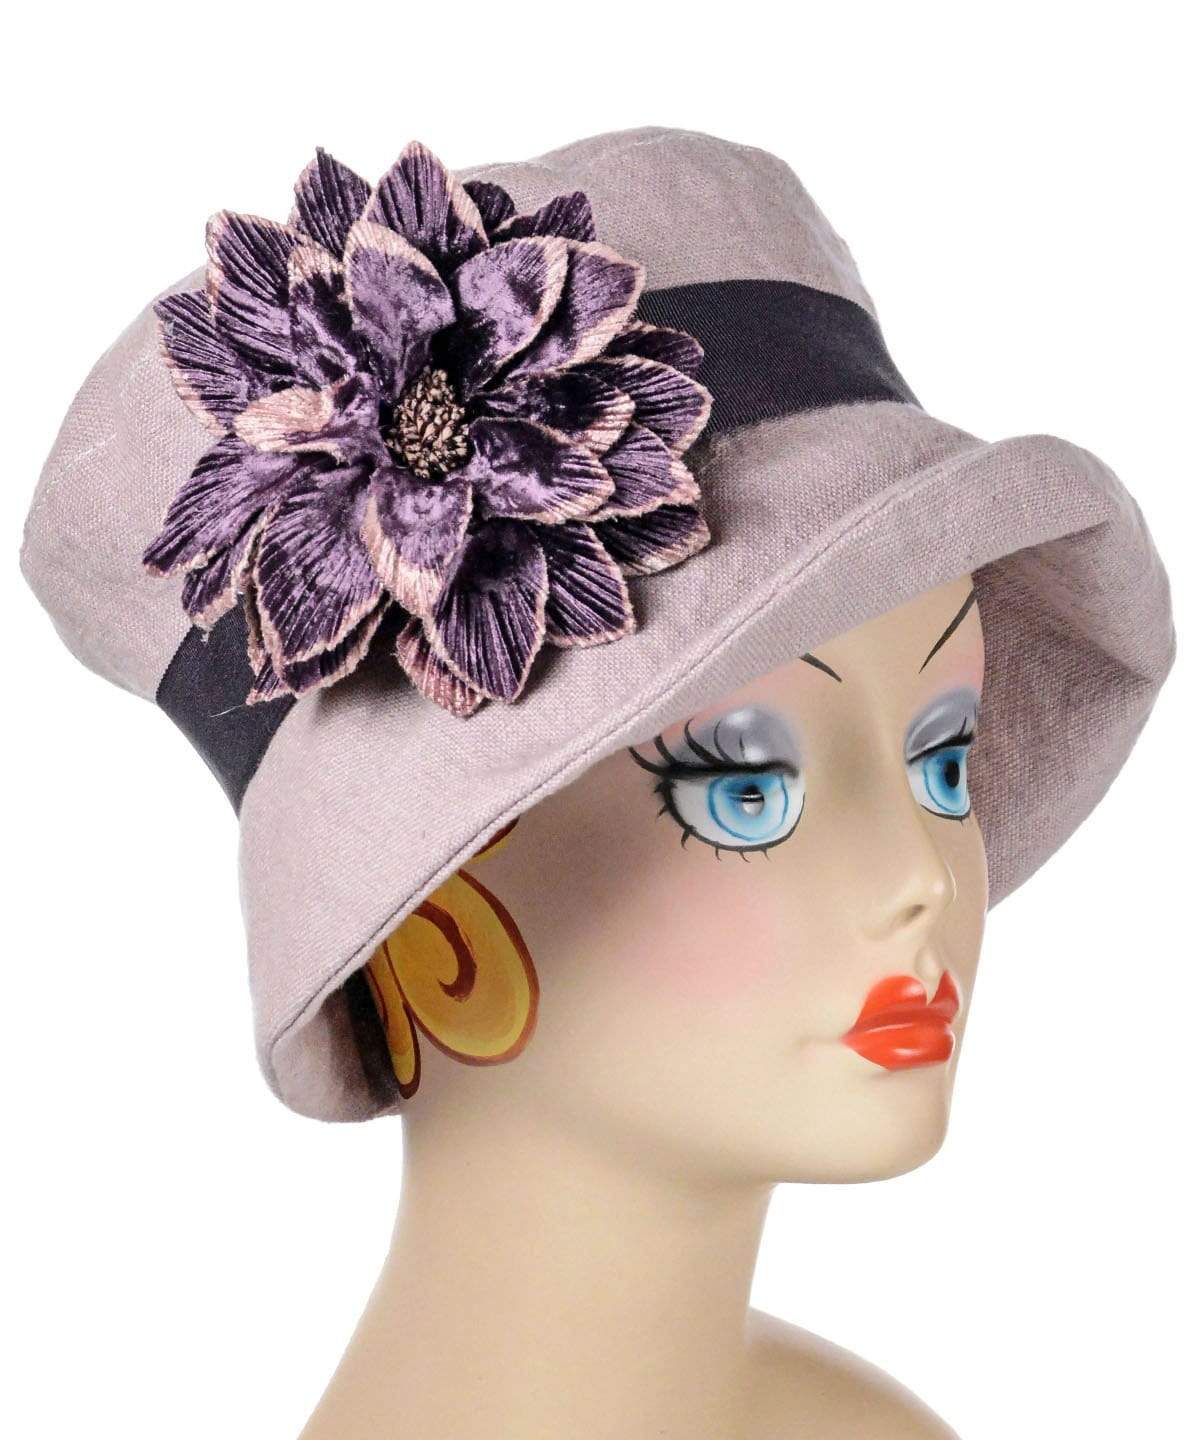 Molly Bucket Style Hat Rose Quartz Linen with Black Band featuring Large  Custom Velvety  Purple Flower | Handmade By Pandemonium Millinery in Seattle WA